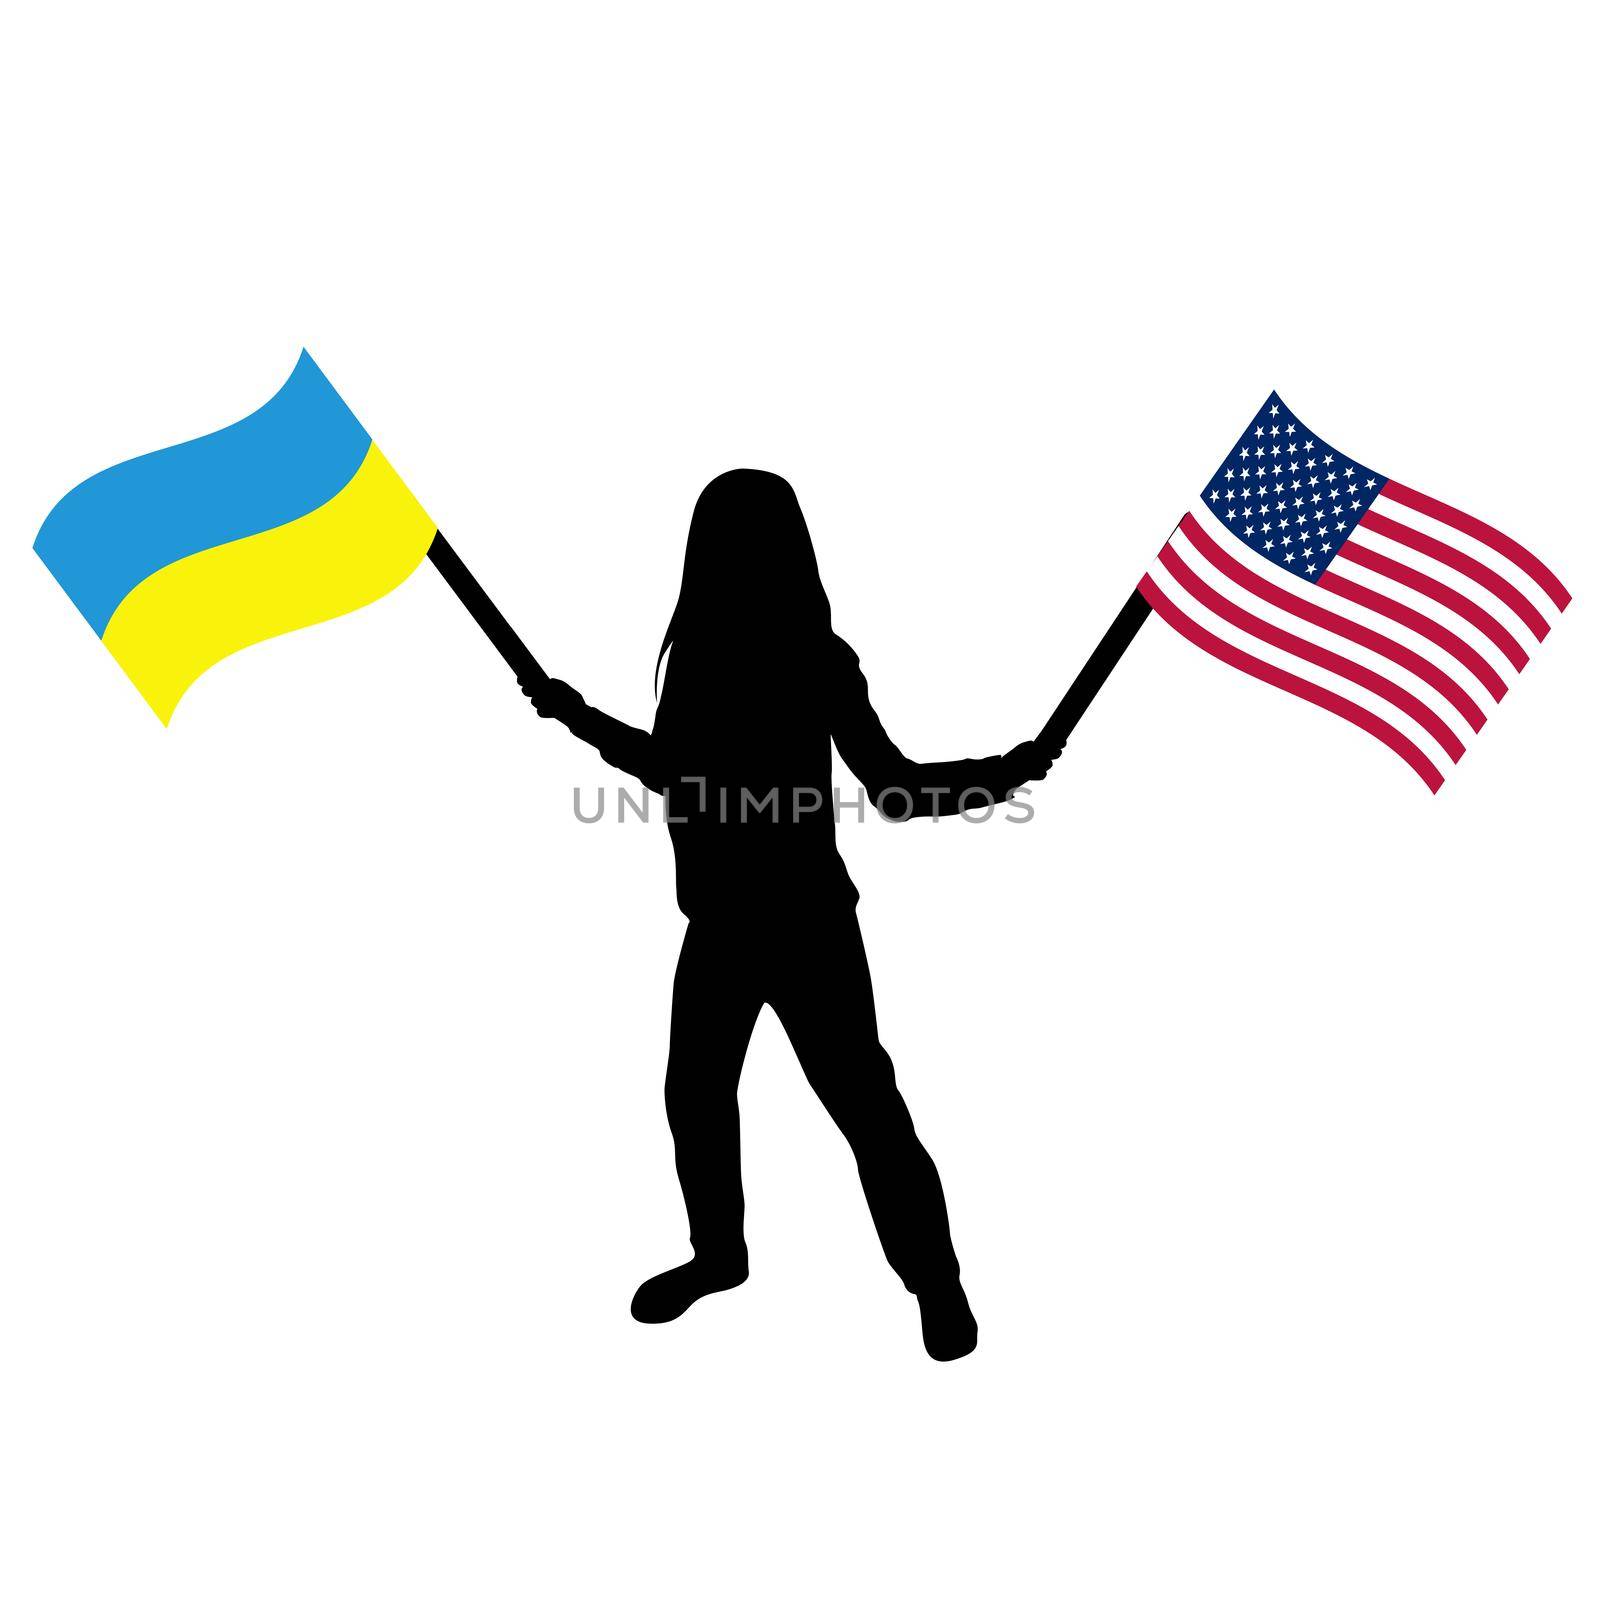 Ukraine and USA concept with girl holding the Ukraine and USA flags by hibrida13